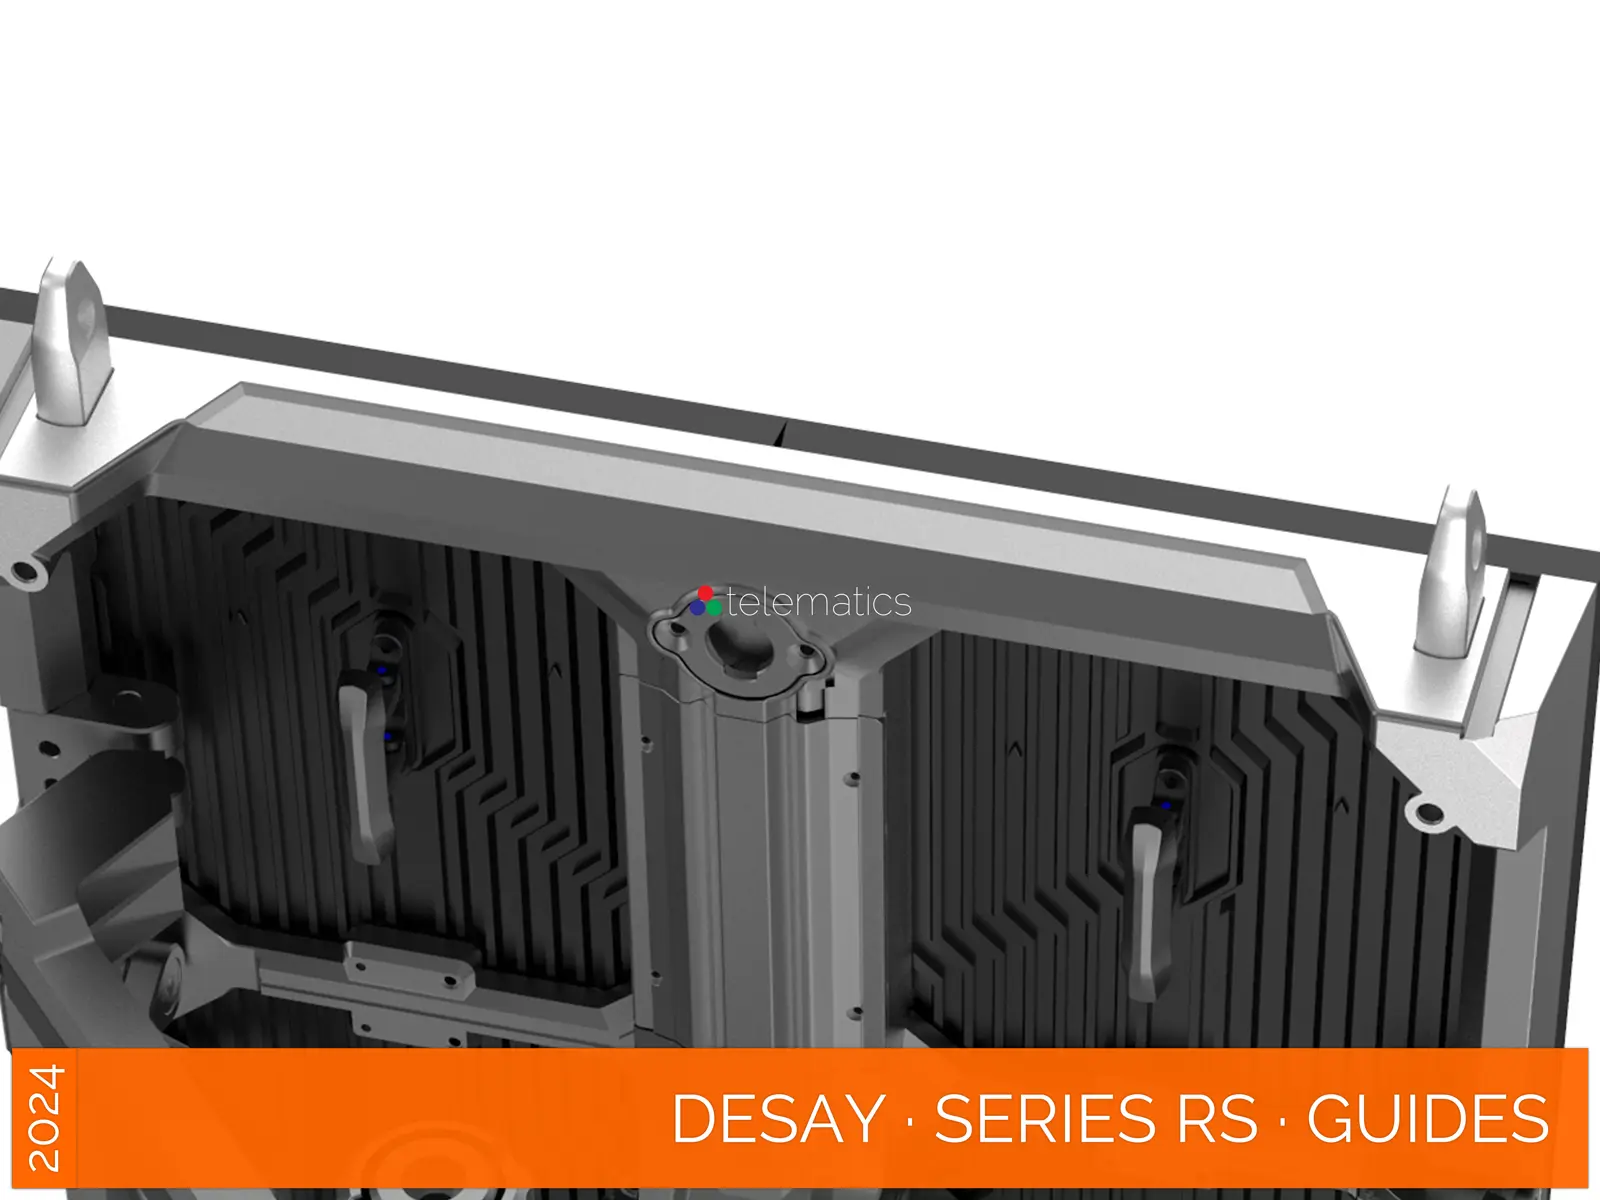 Desay · Series RS · Direct View LED Display Panel · Full Pixel Range · Rental Or Stage · Indoor Rated · Rapid Service And Setup · Robust Alignment Pins For Secure Installation · NovaStar COEX MX CX · Vision Management Platform · Viplex · review · price · cost · priced from $1,790 per square meter